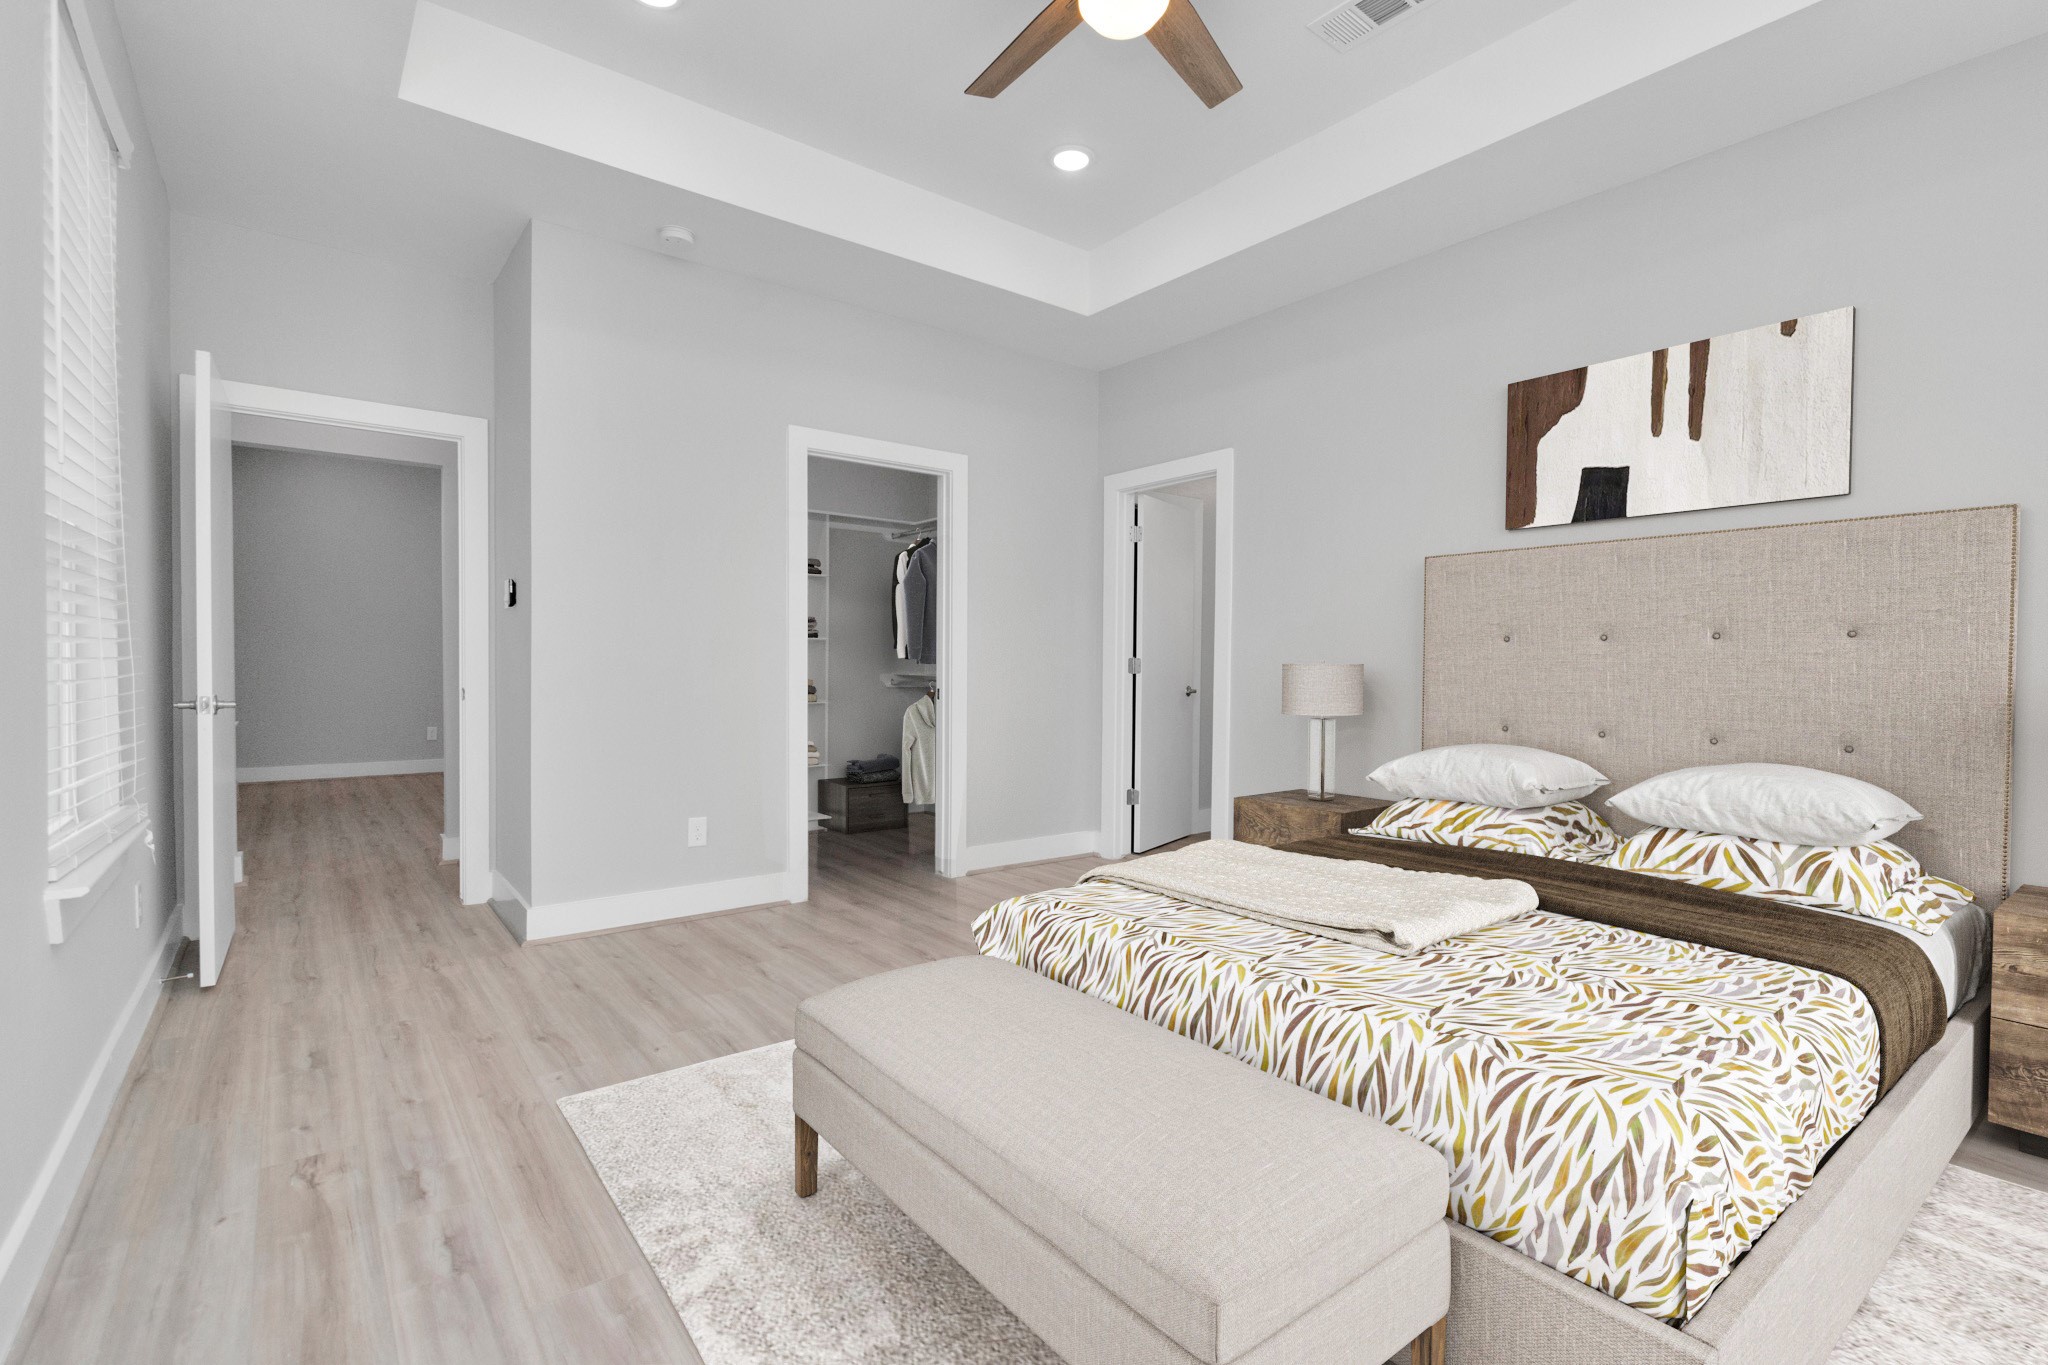 VIRTUAL STAGING